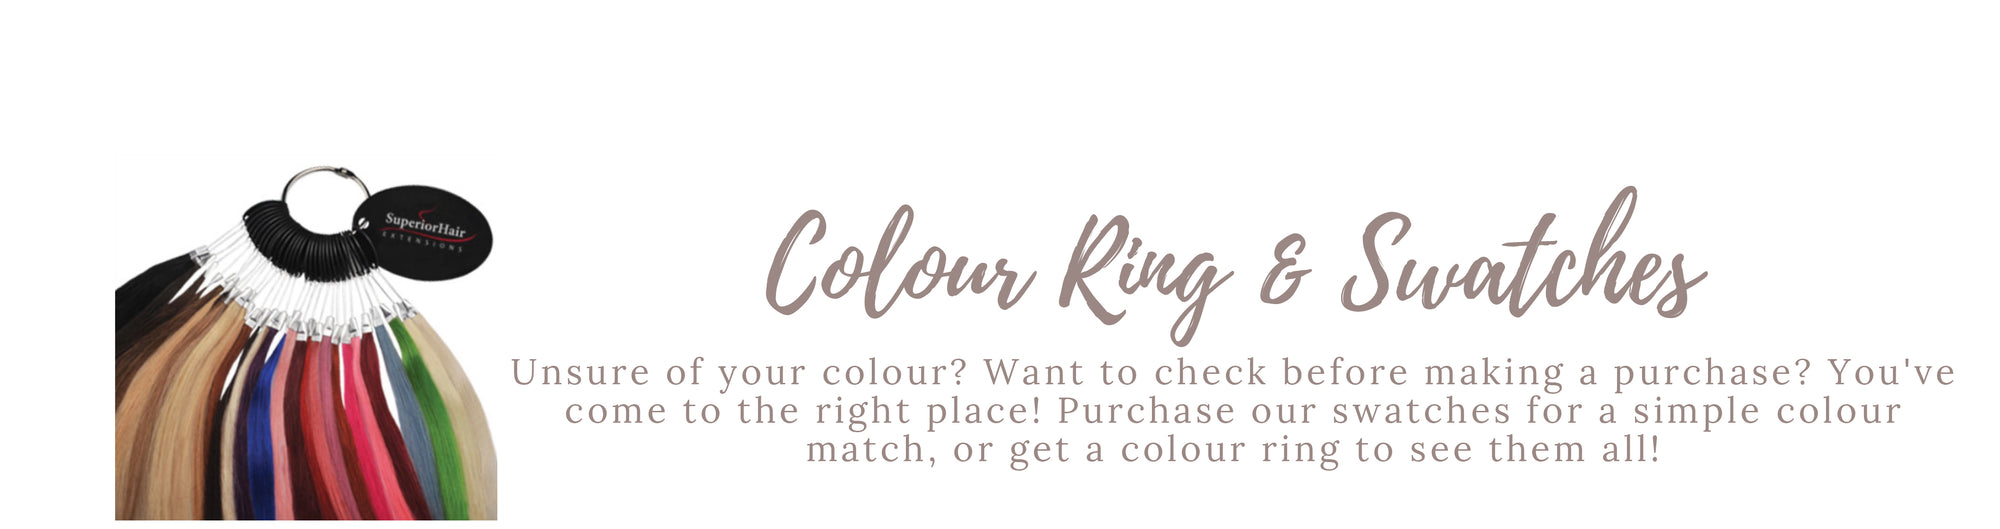 Colour ring & swatch